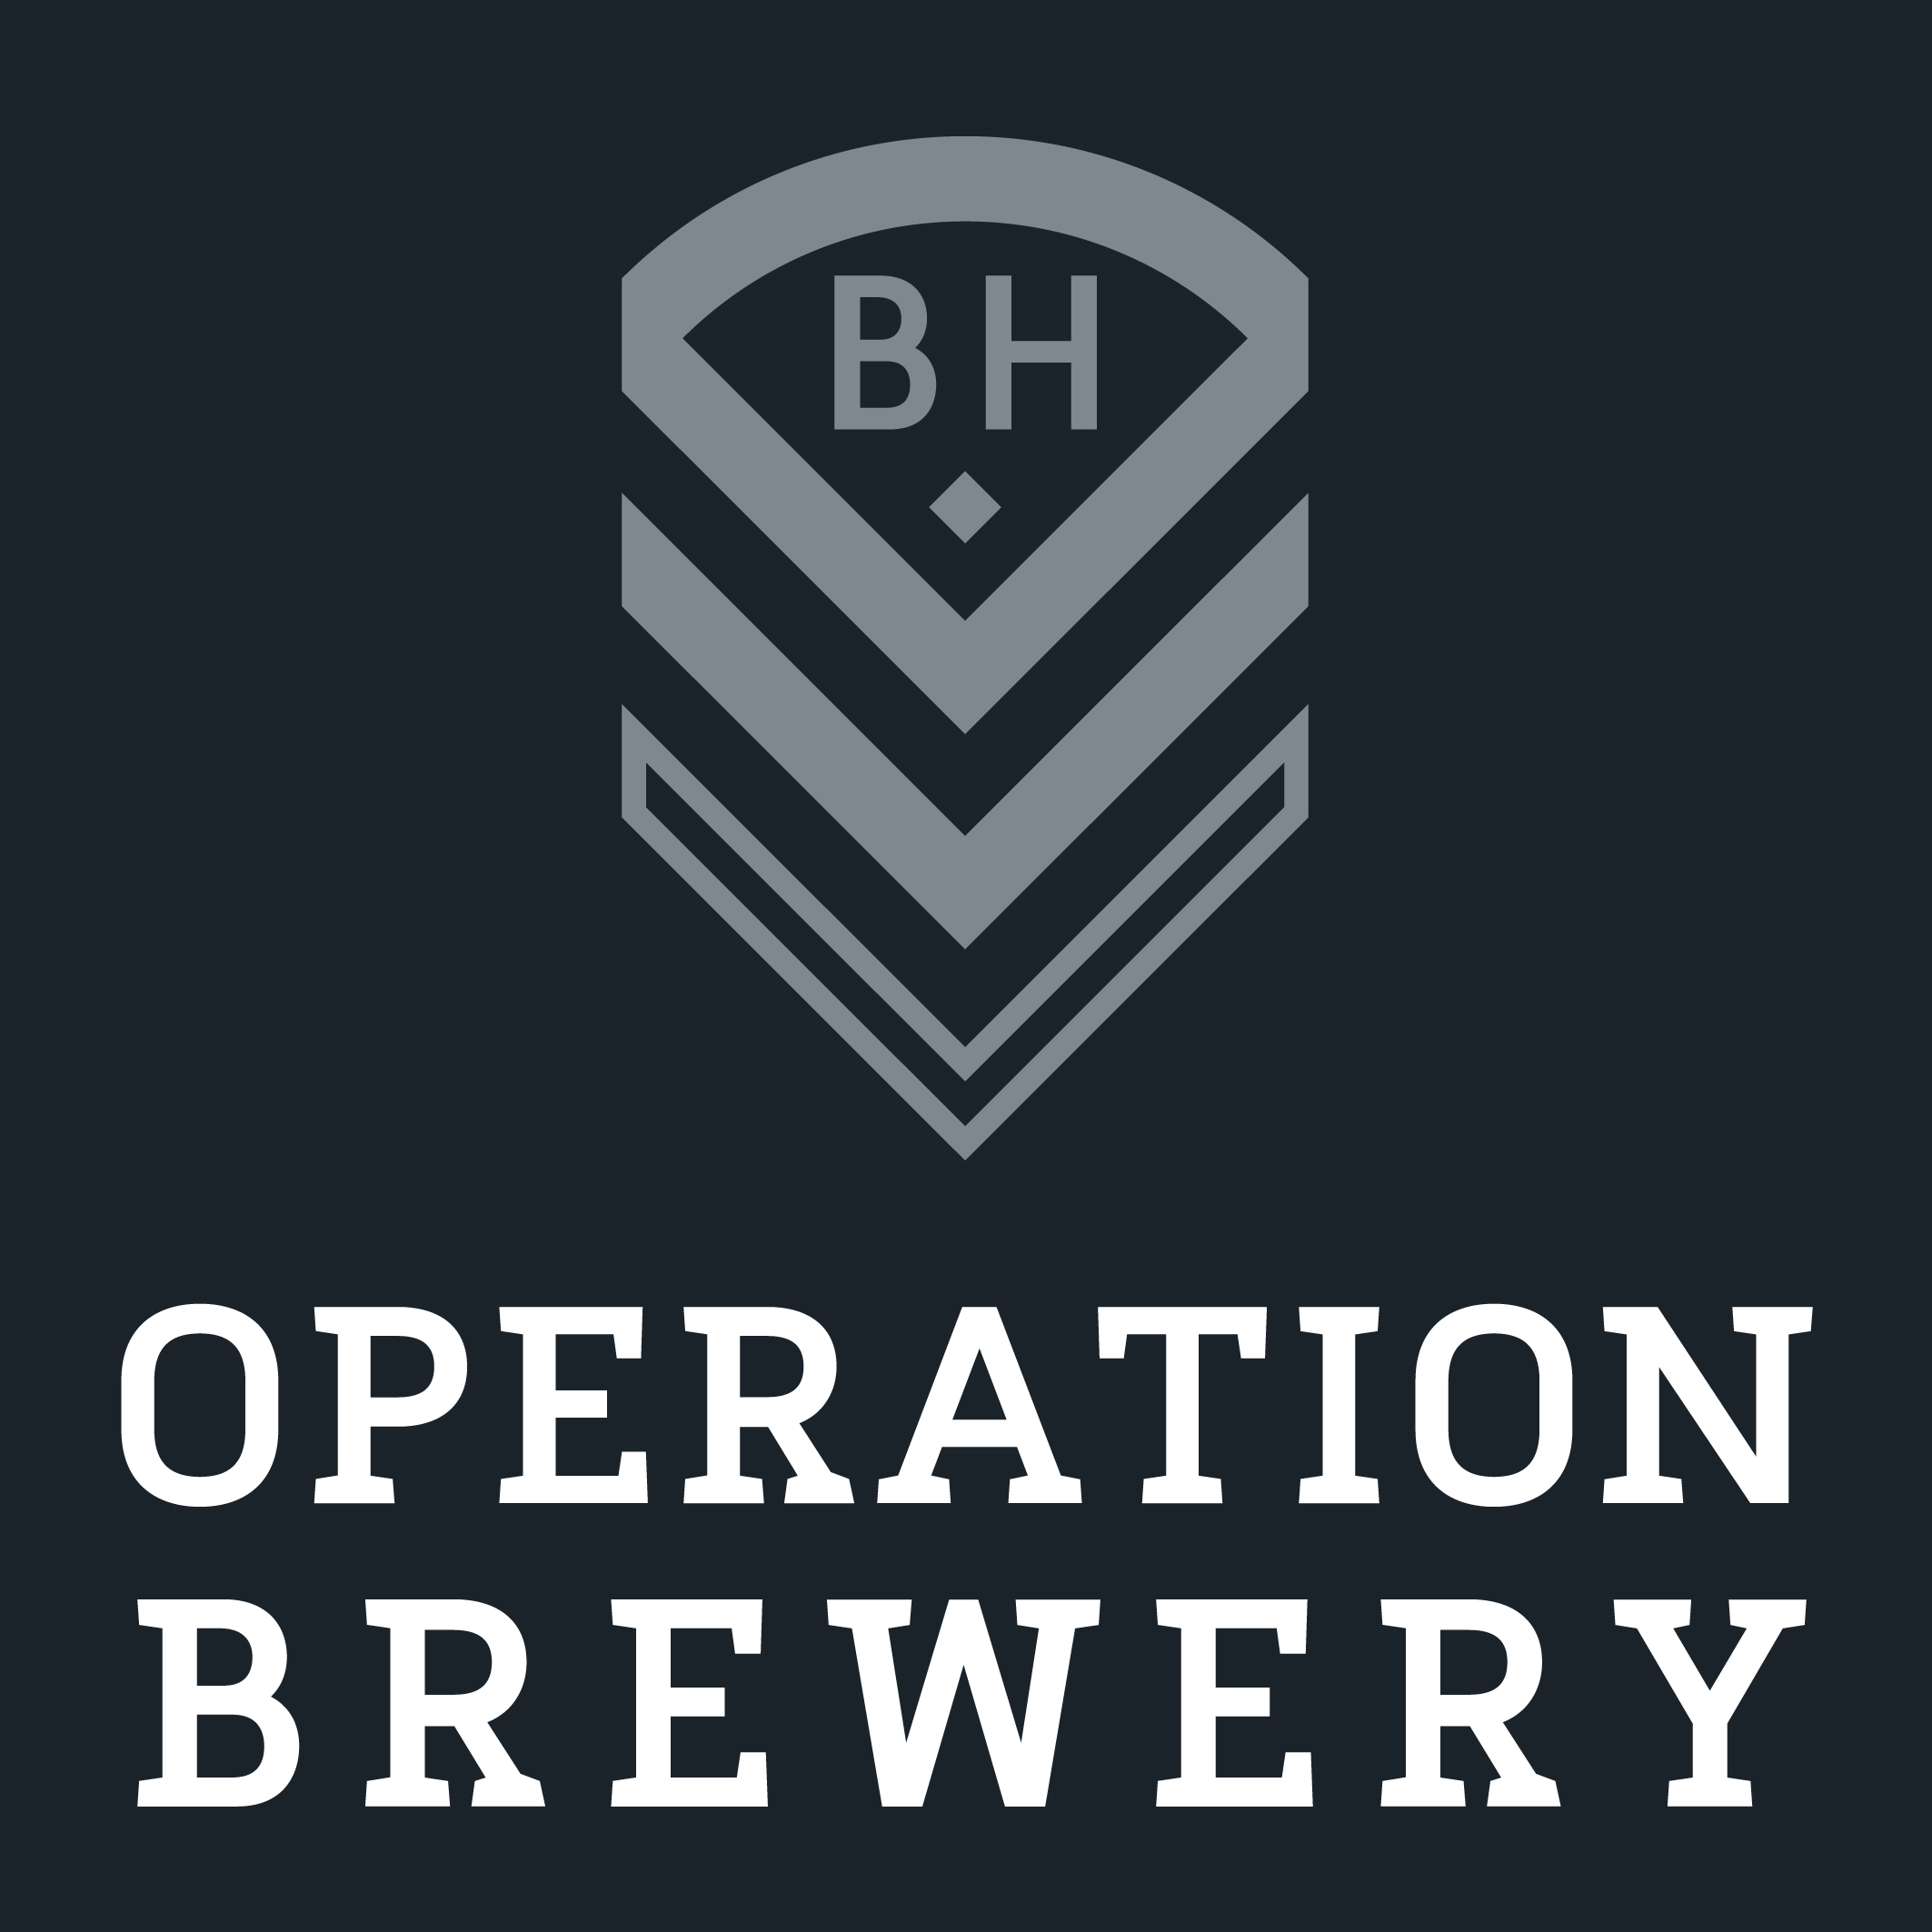 Operation Brewery by Black Hops Brewing